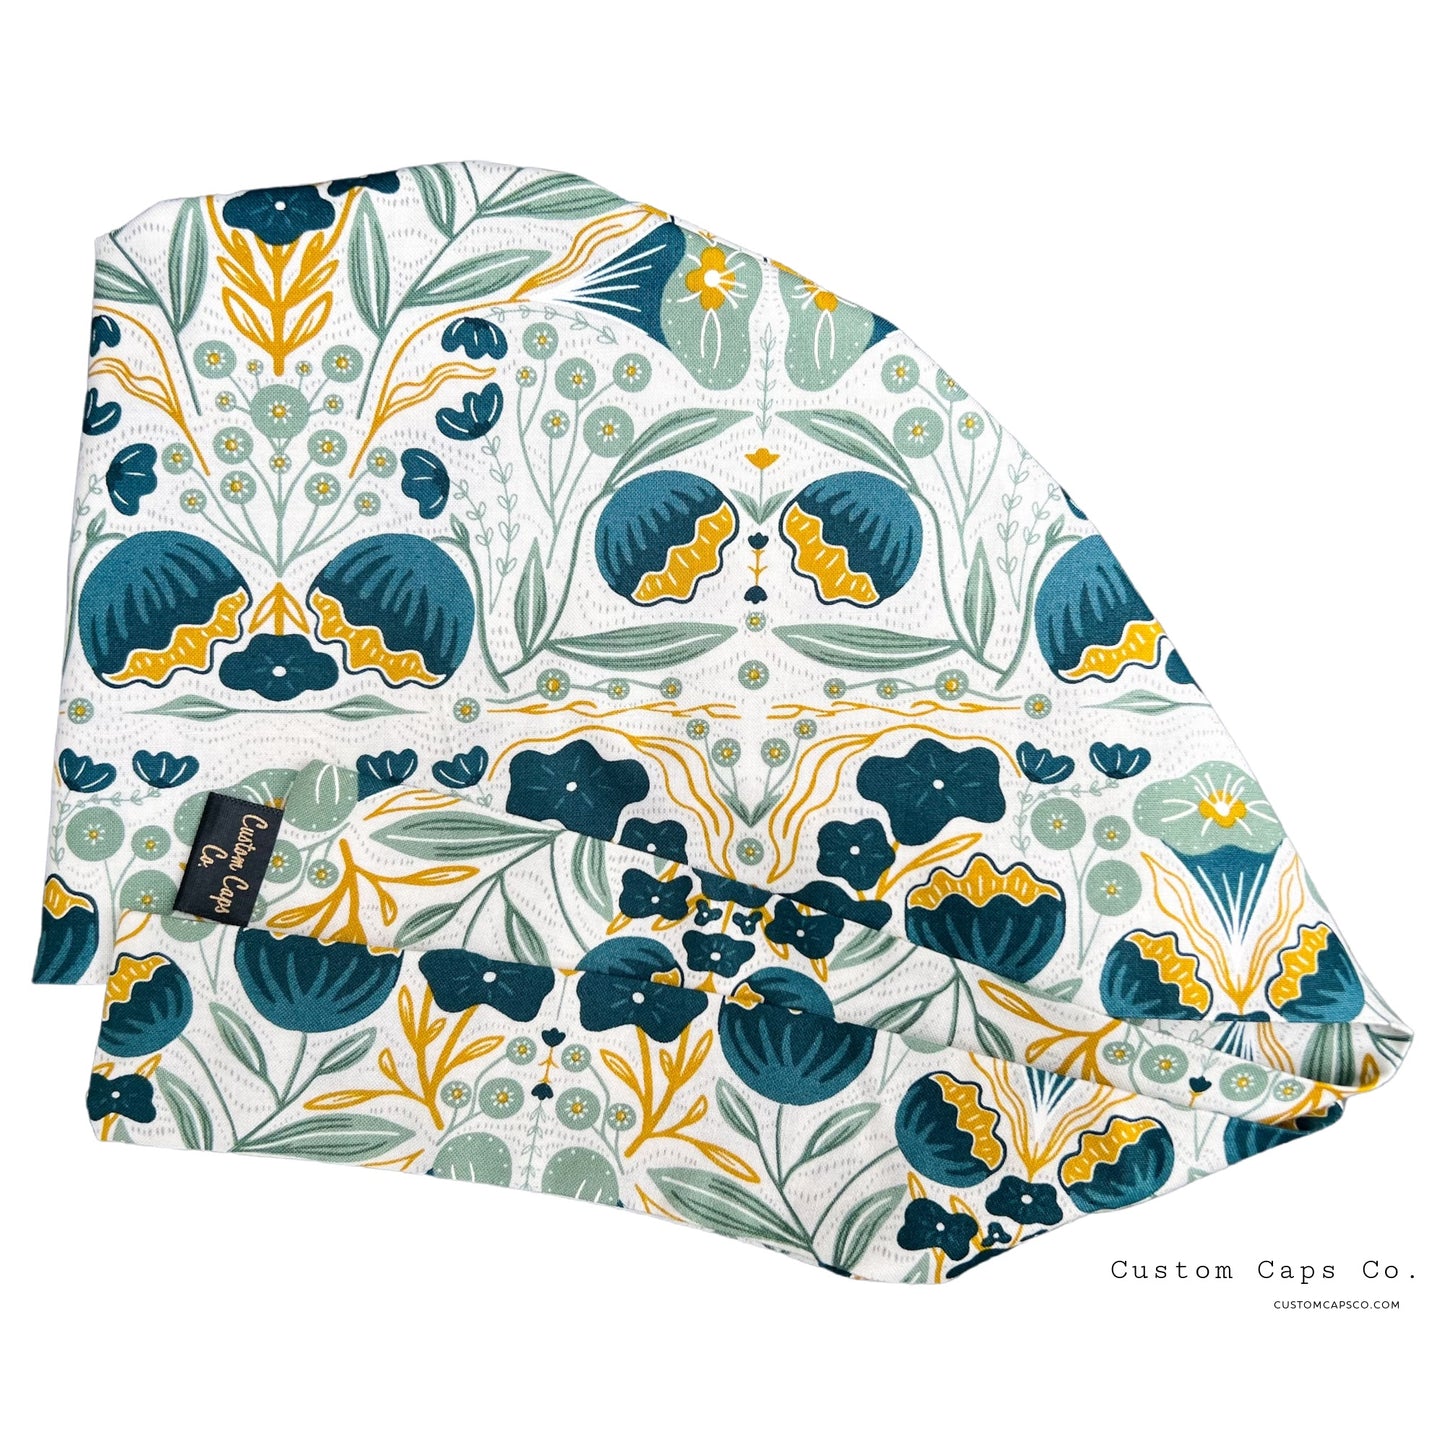 Modern Floral Toile in Sage, Teal & Yellow | Pixie